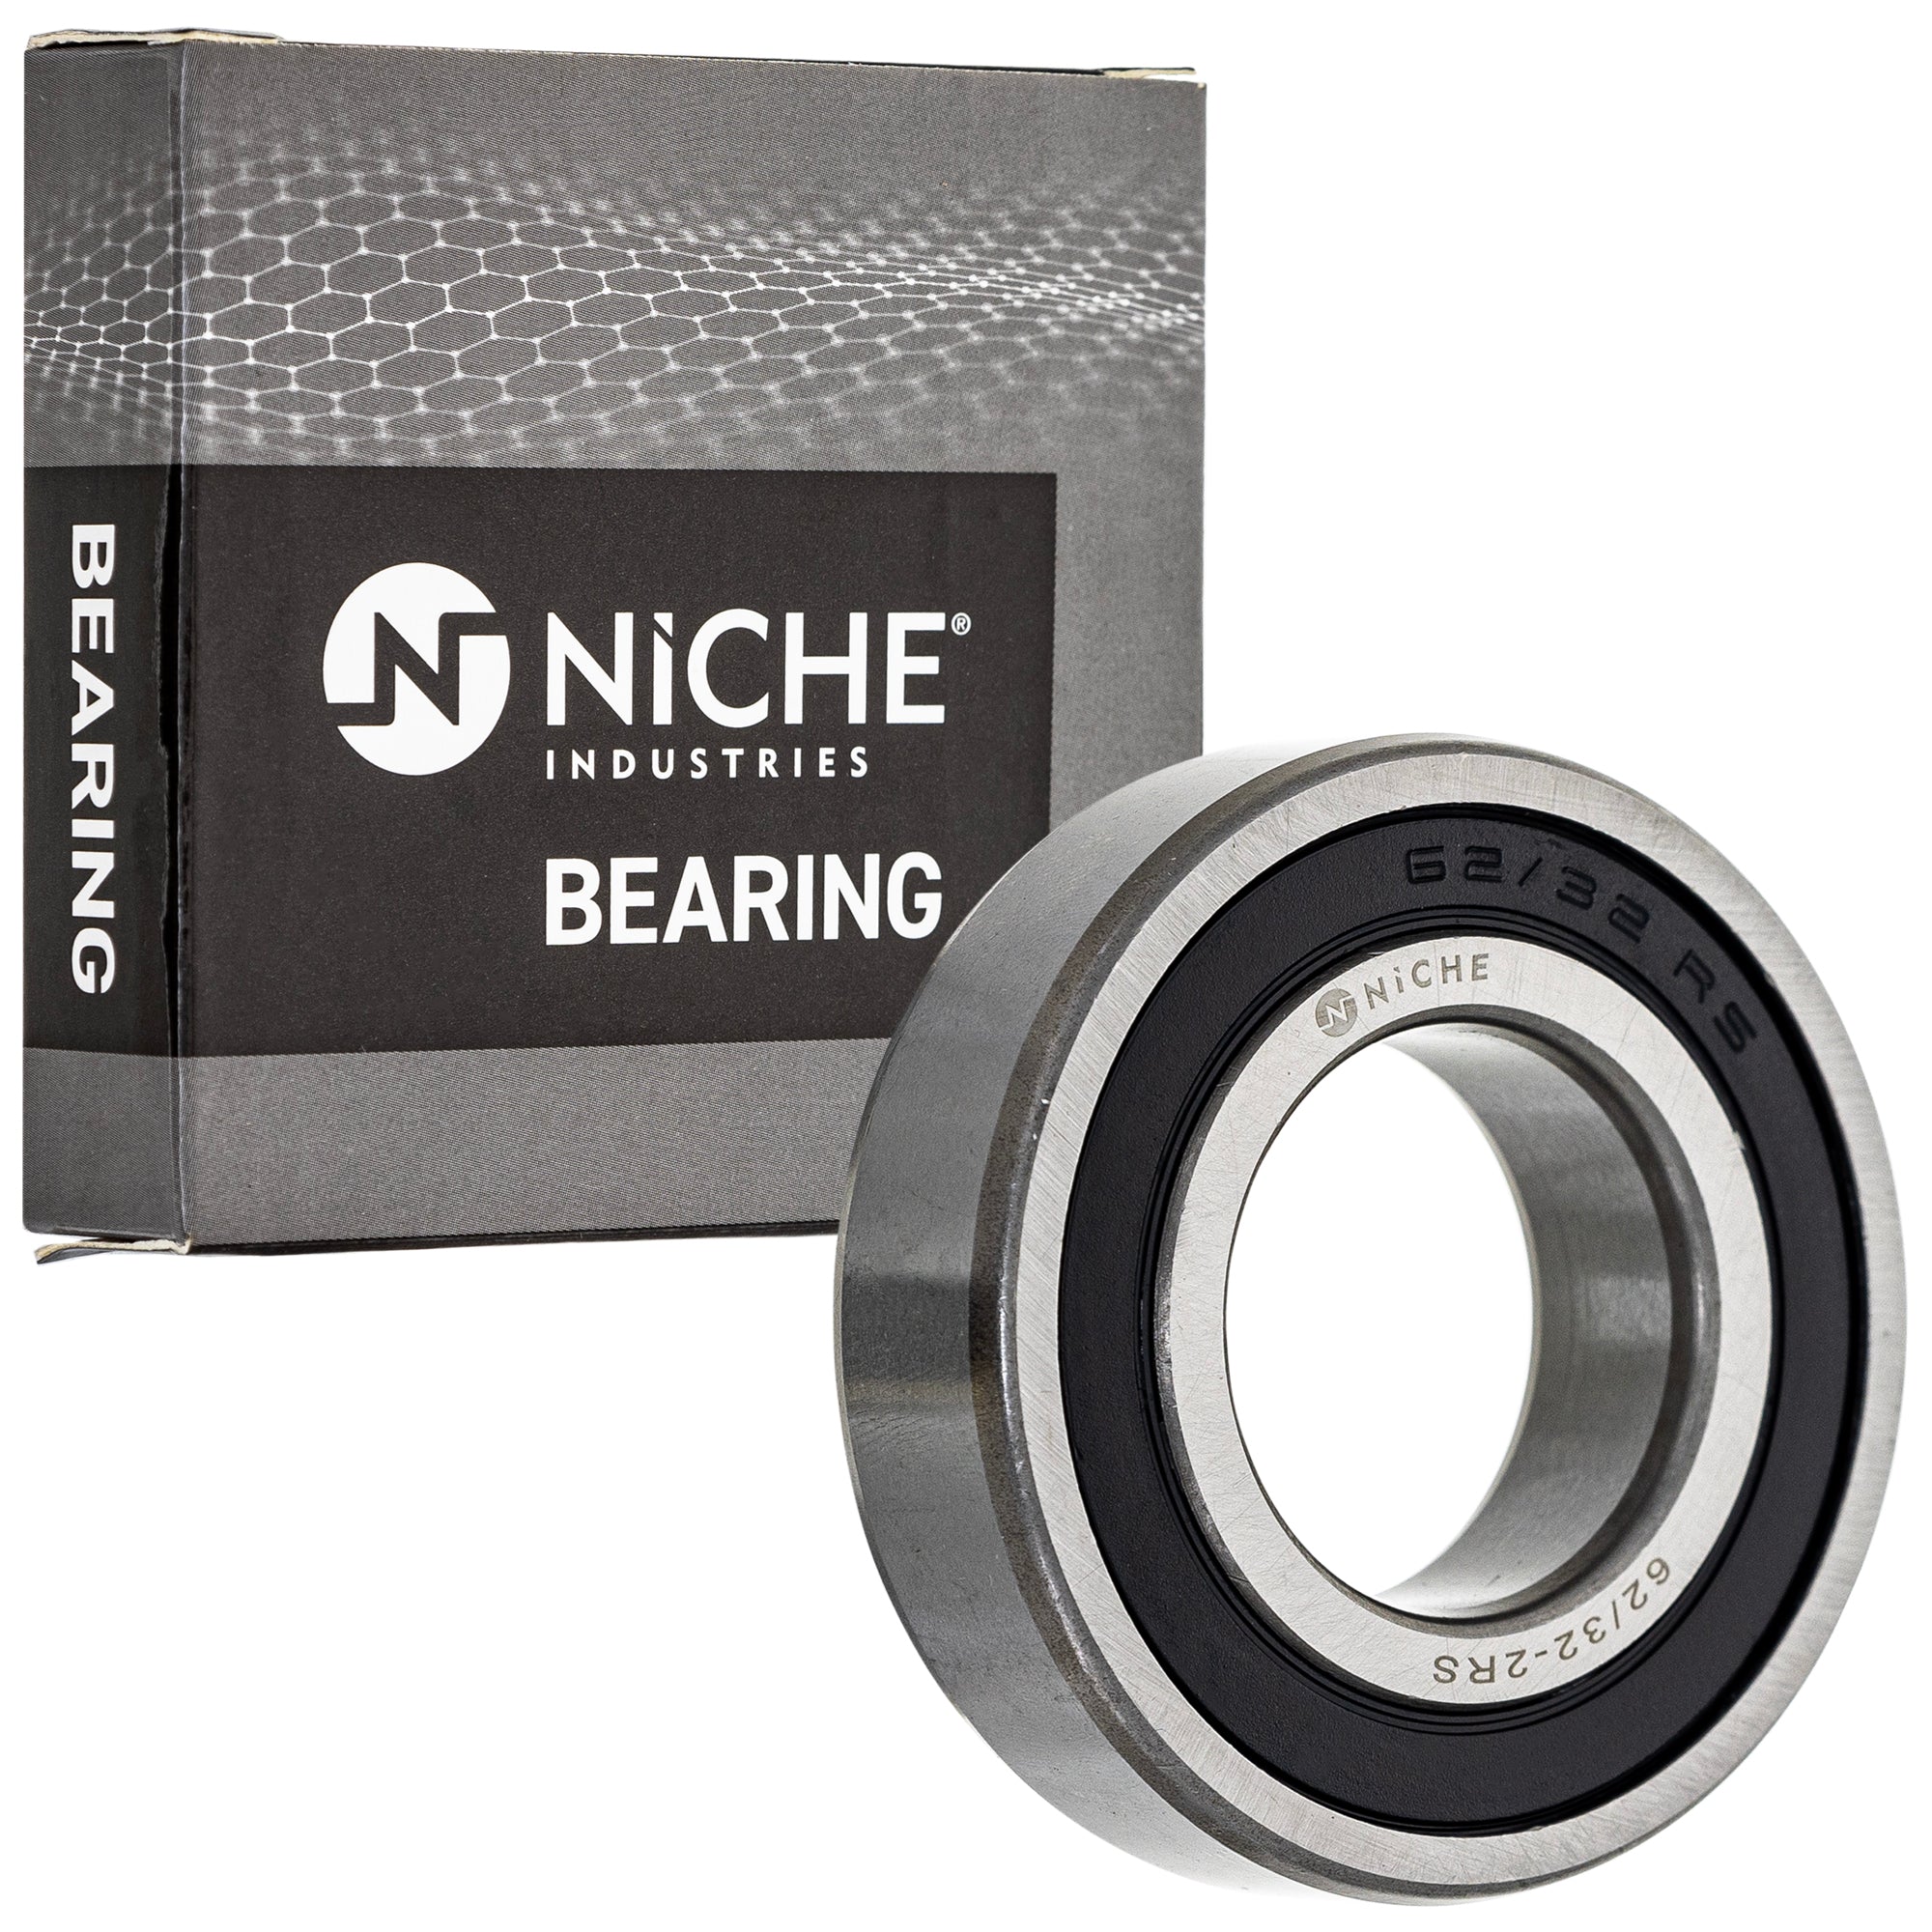 NICHE 519-CBB2282R Bearing & Seal Kit for zOTHER